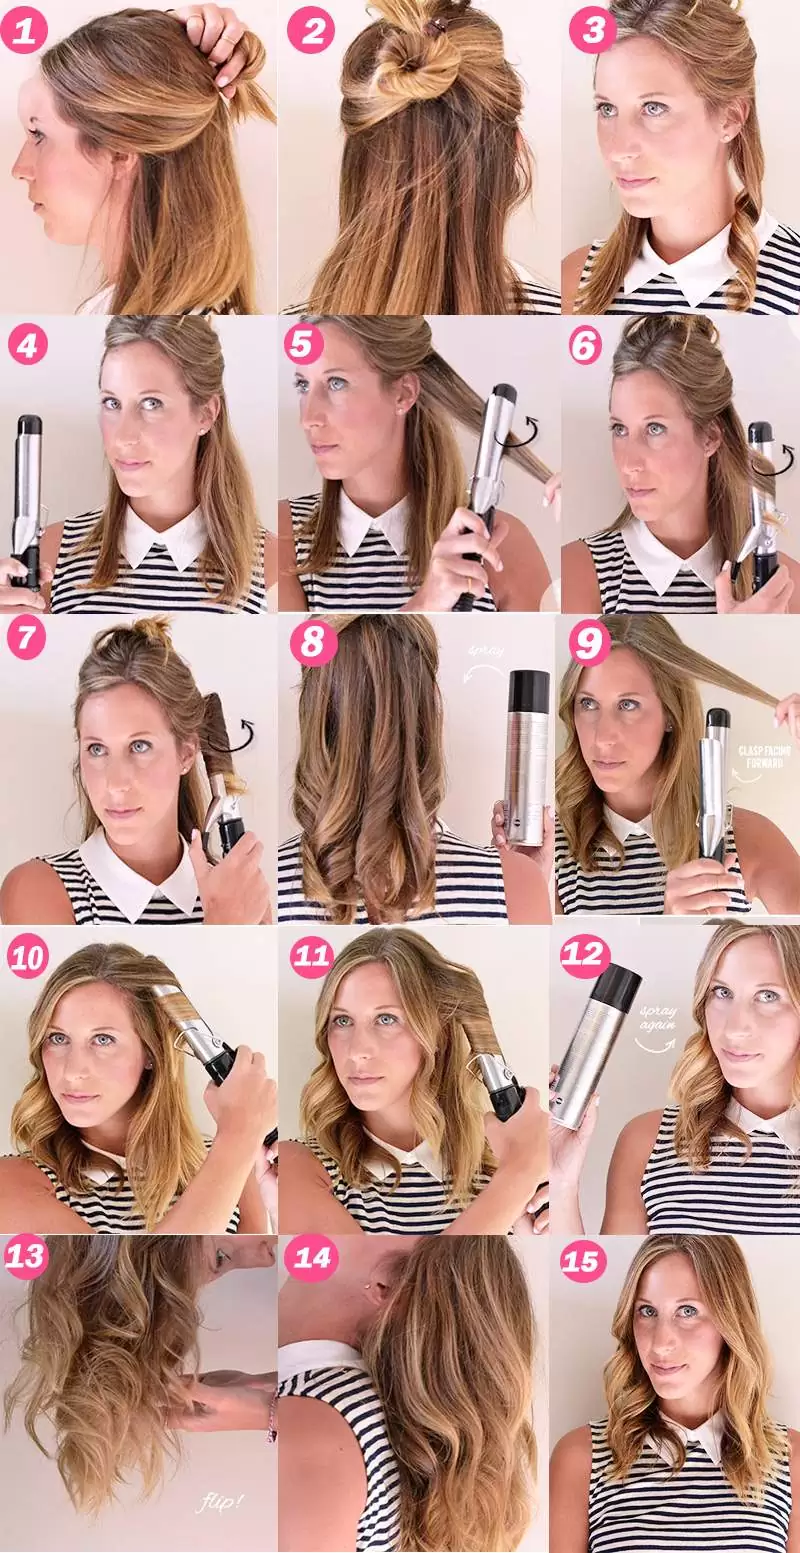 how to curling hair properly